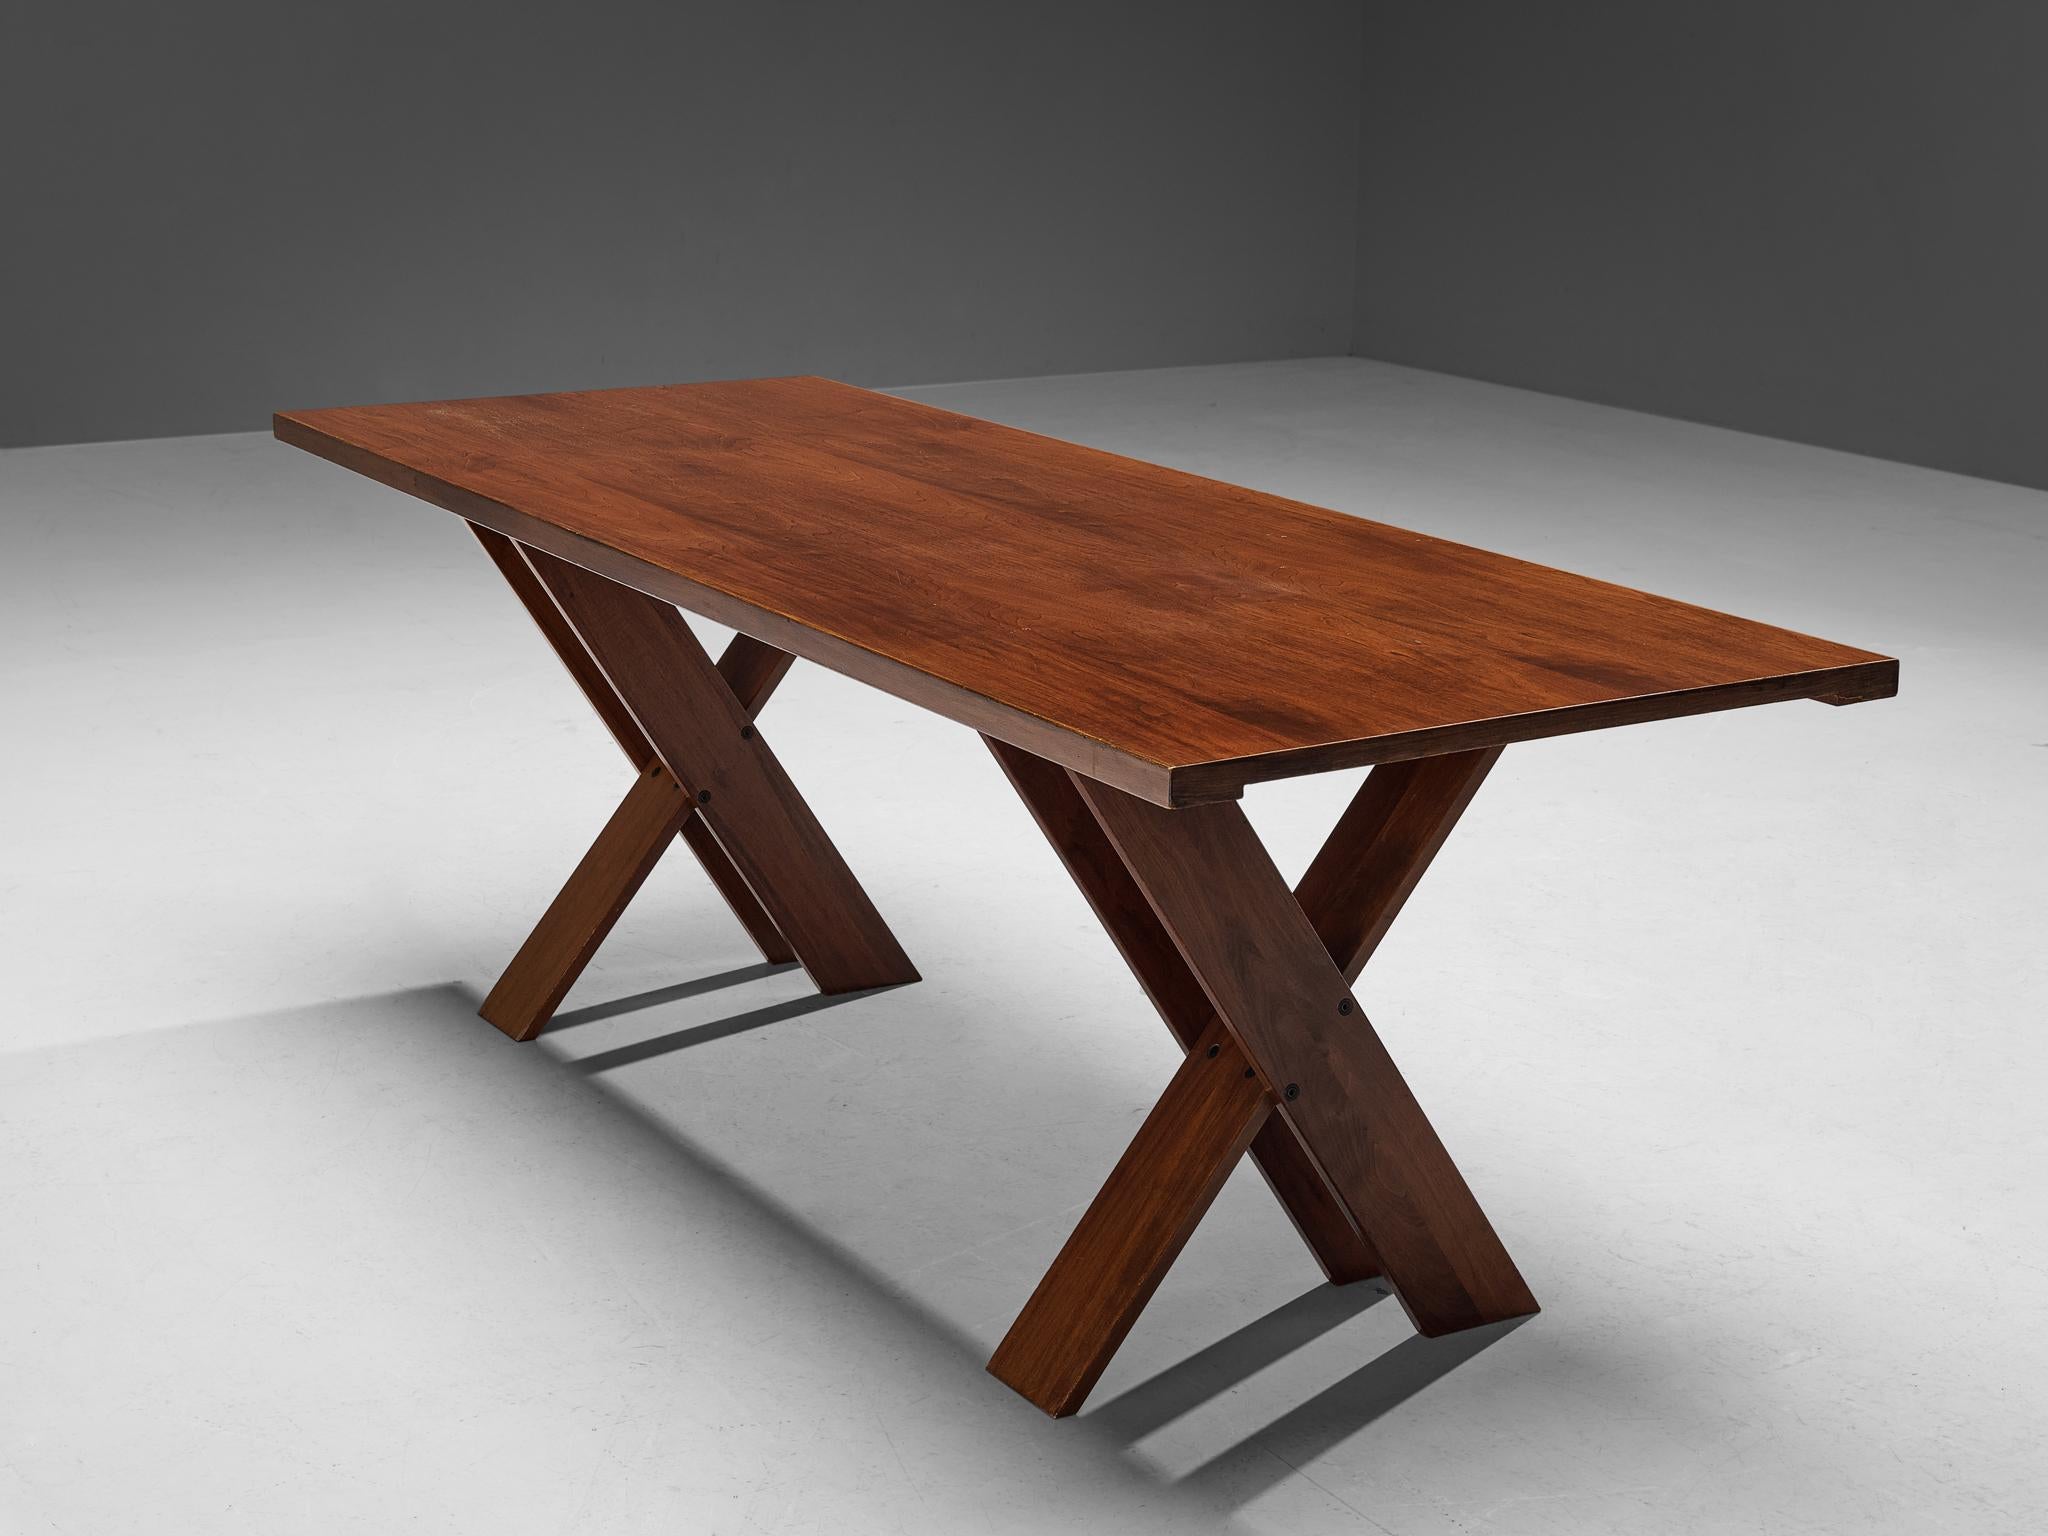 Marco Zanuso for Poggi, 'TL58' dining table, walnut, Italy, 1974

This dining table is manufactured by Poggi in the 1974. It features crossed, double legs that give the table an architectural appearance. The table is made of high quality walnut